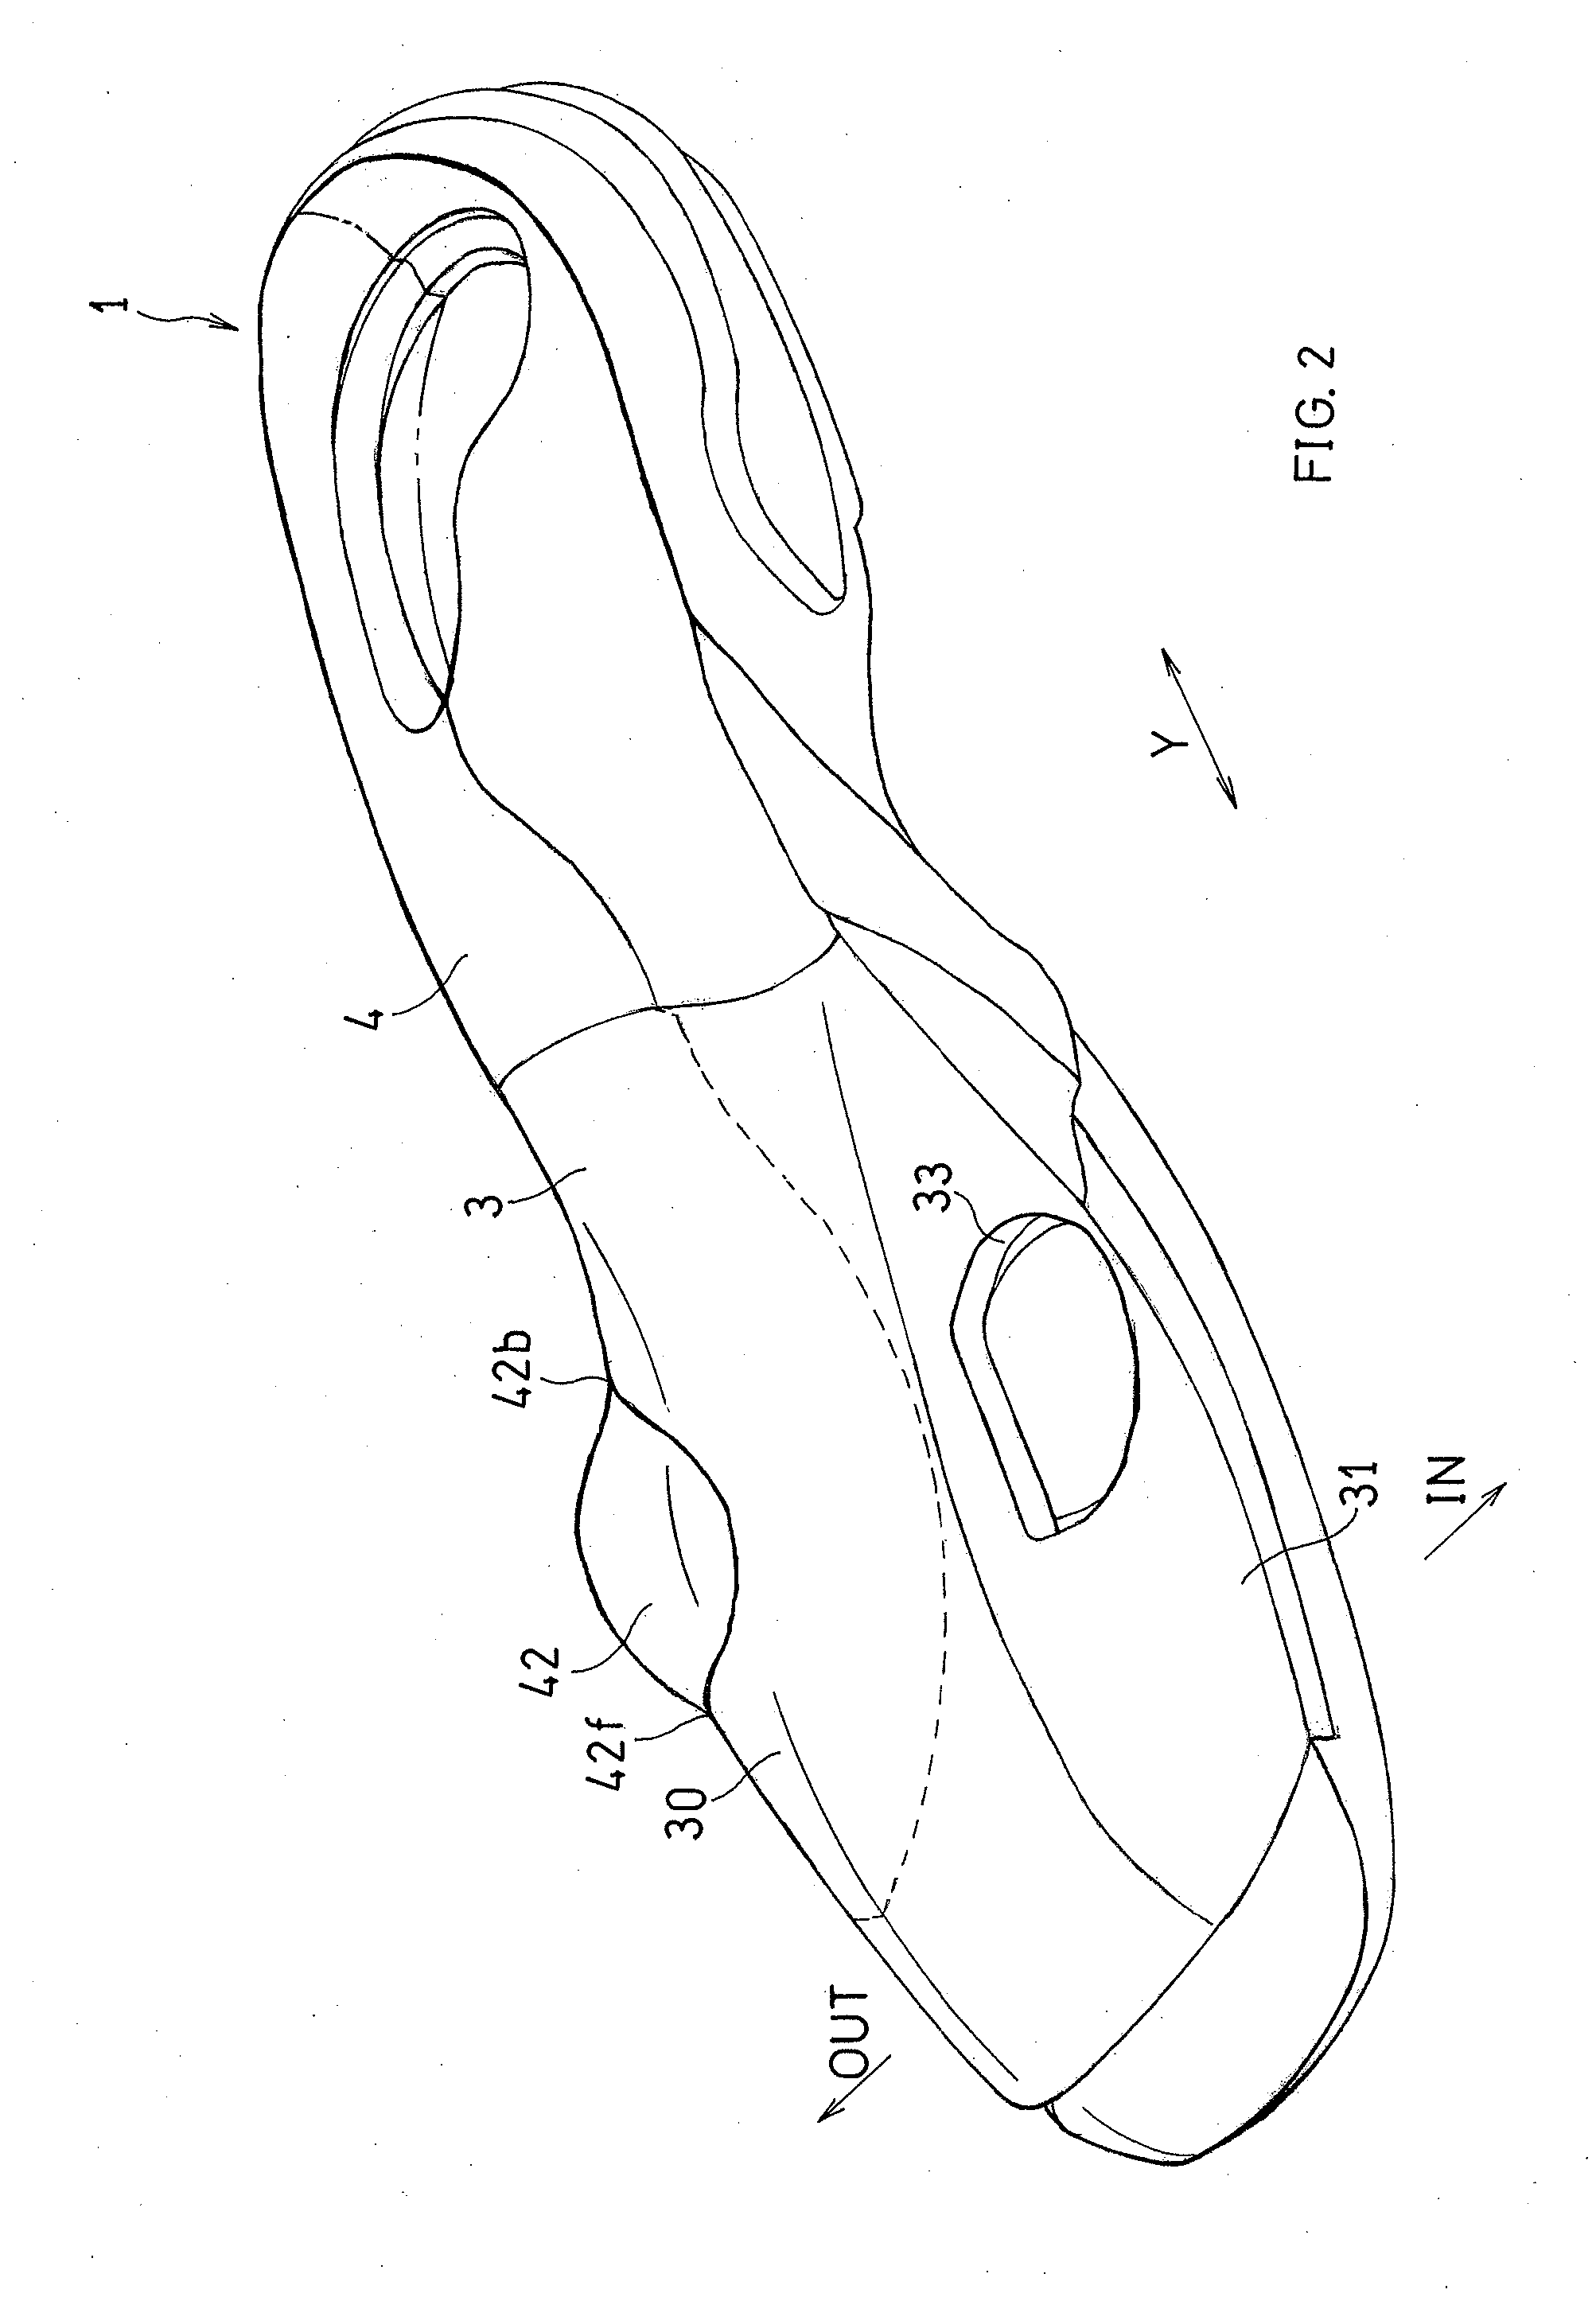 Shoe Sole Having Outsole and Midsole